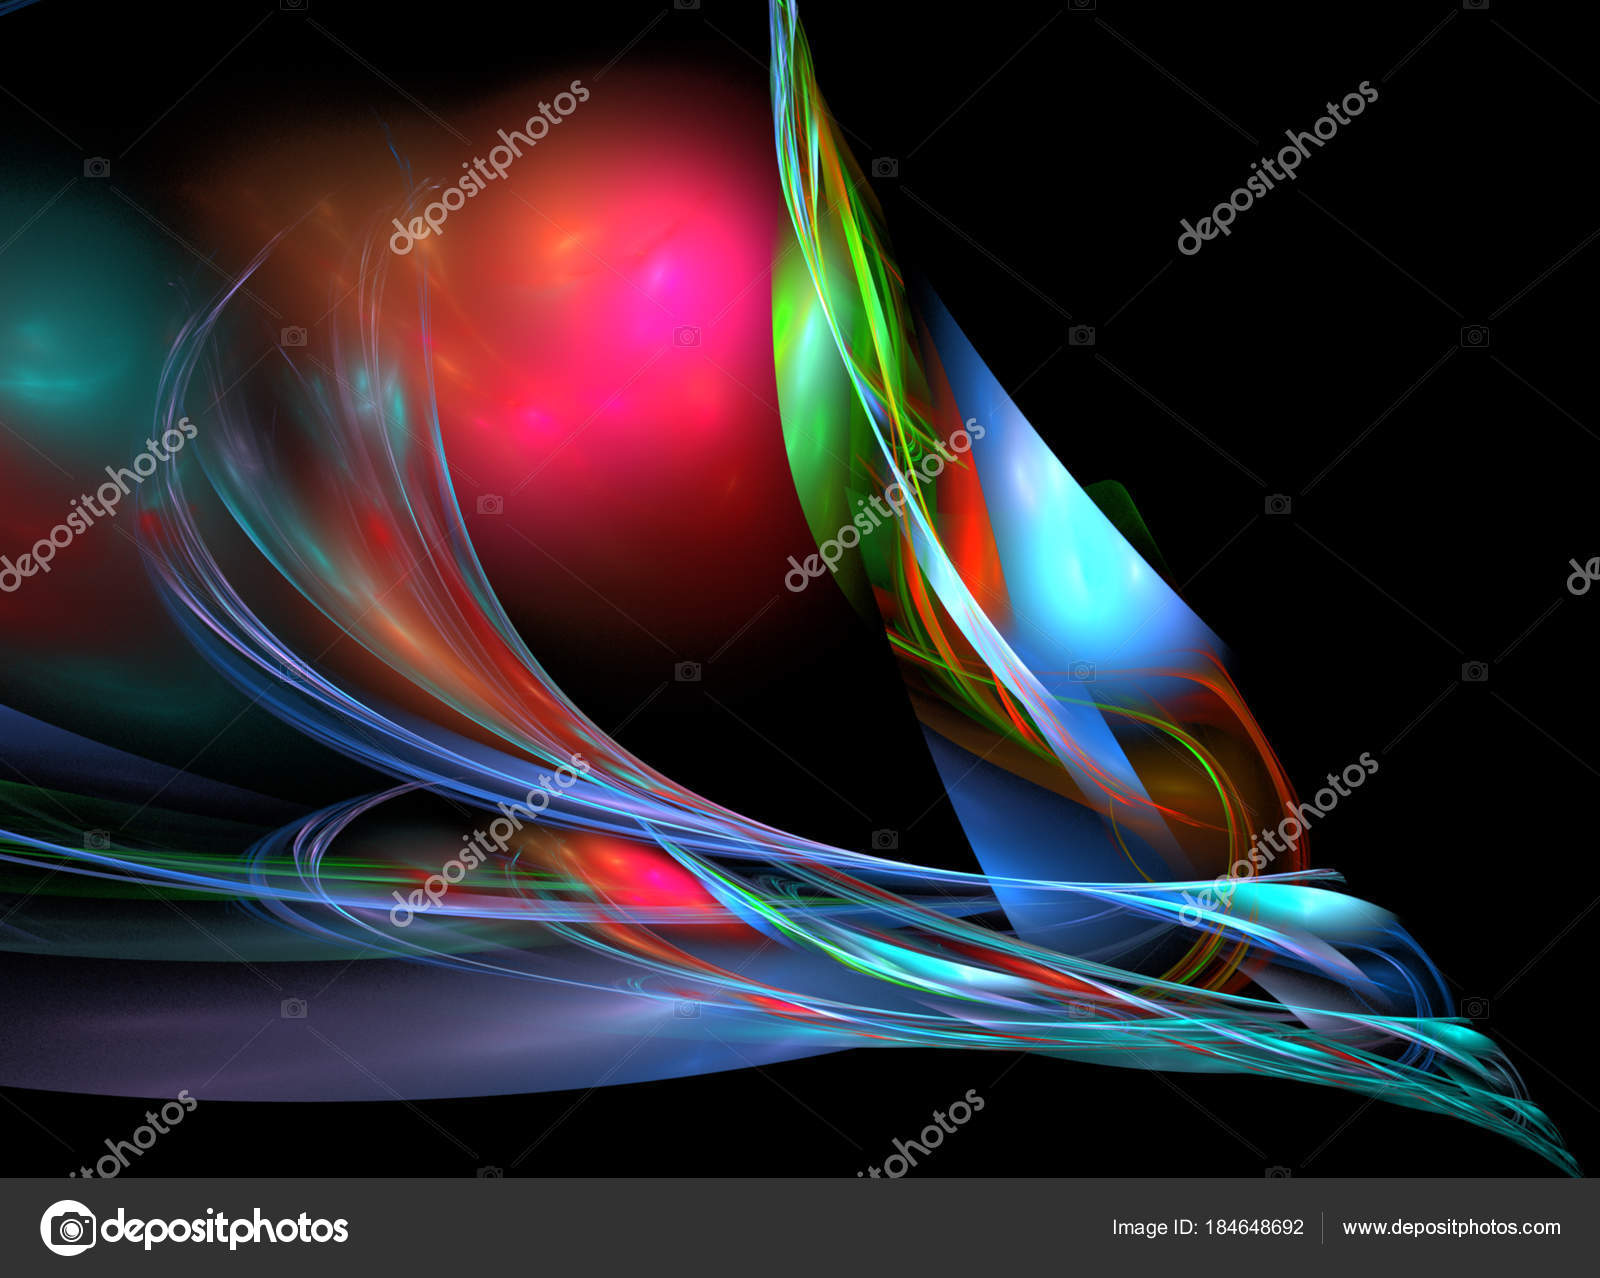 Abstract fractal background — Stock Photo © deltaoff #184648692